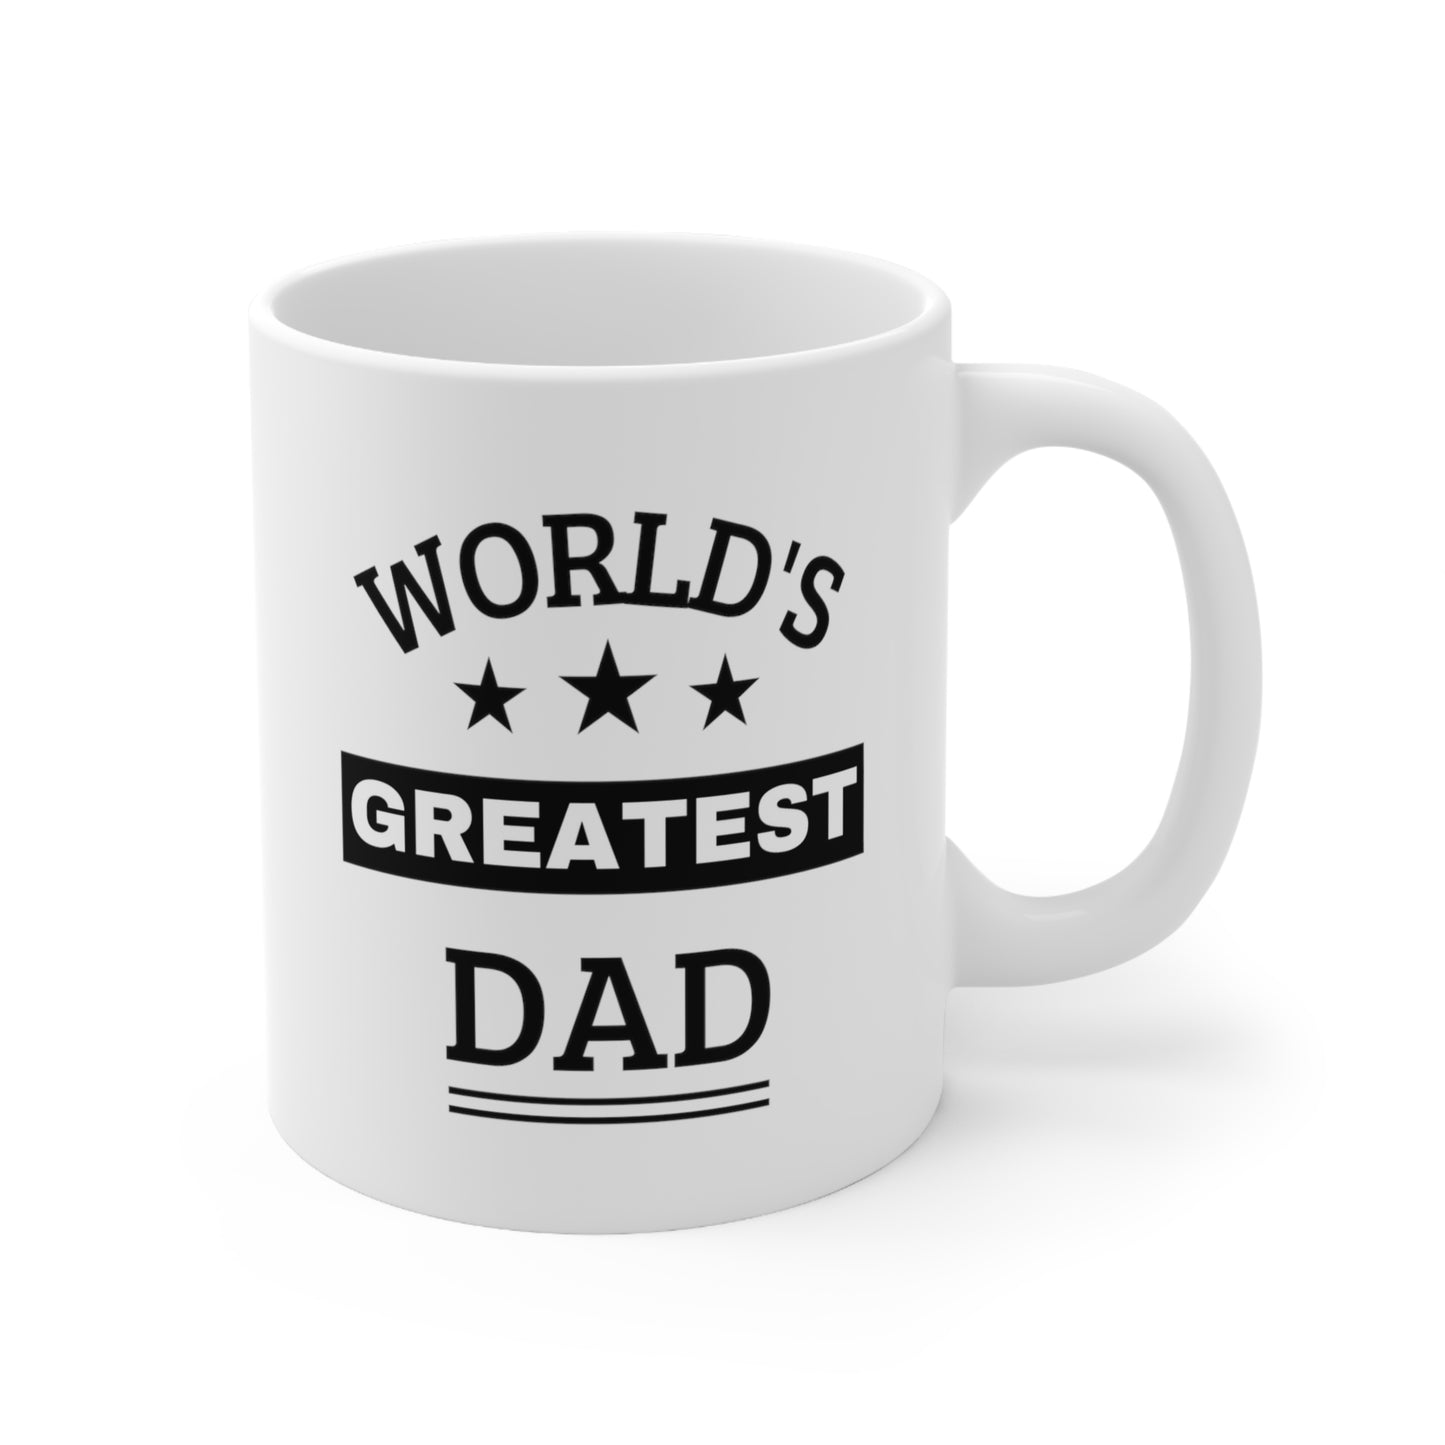 World's Greatest Mug for Dad - Best Gift for Father's Day